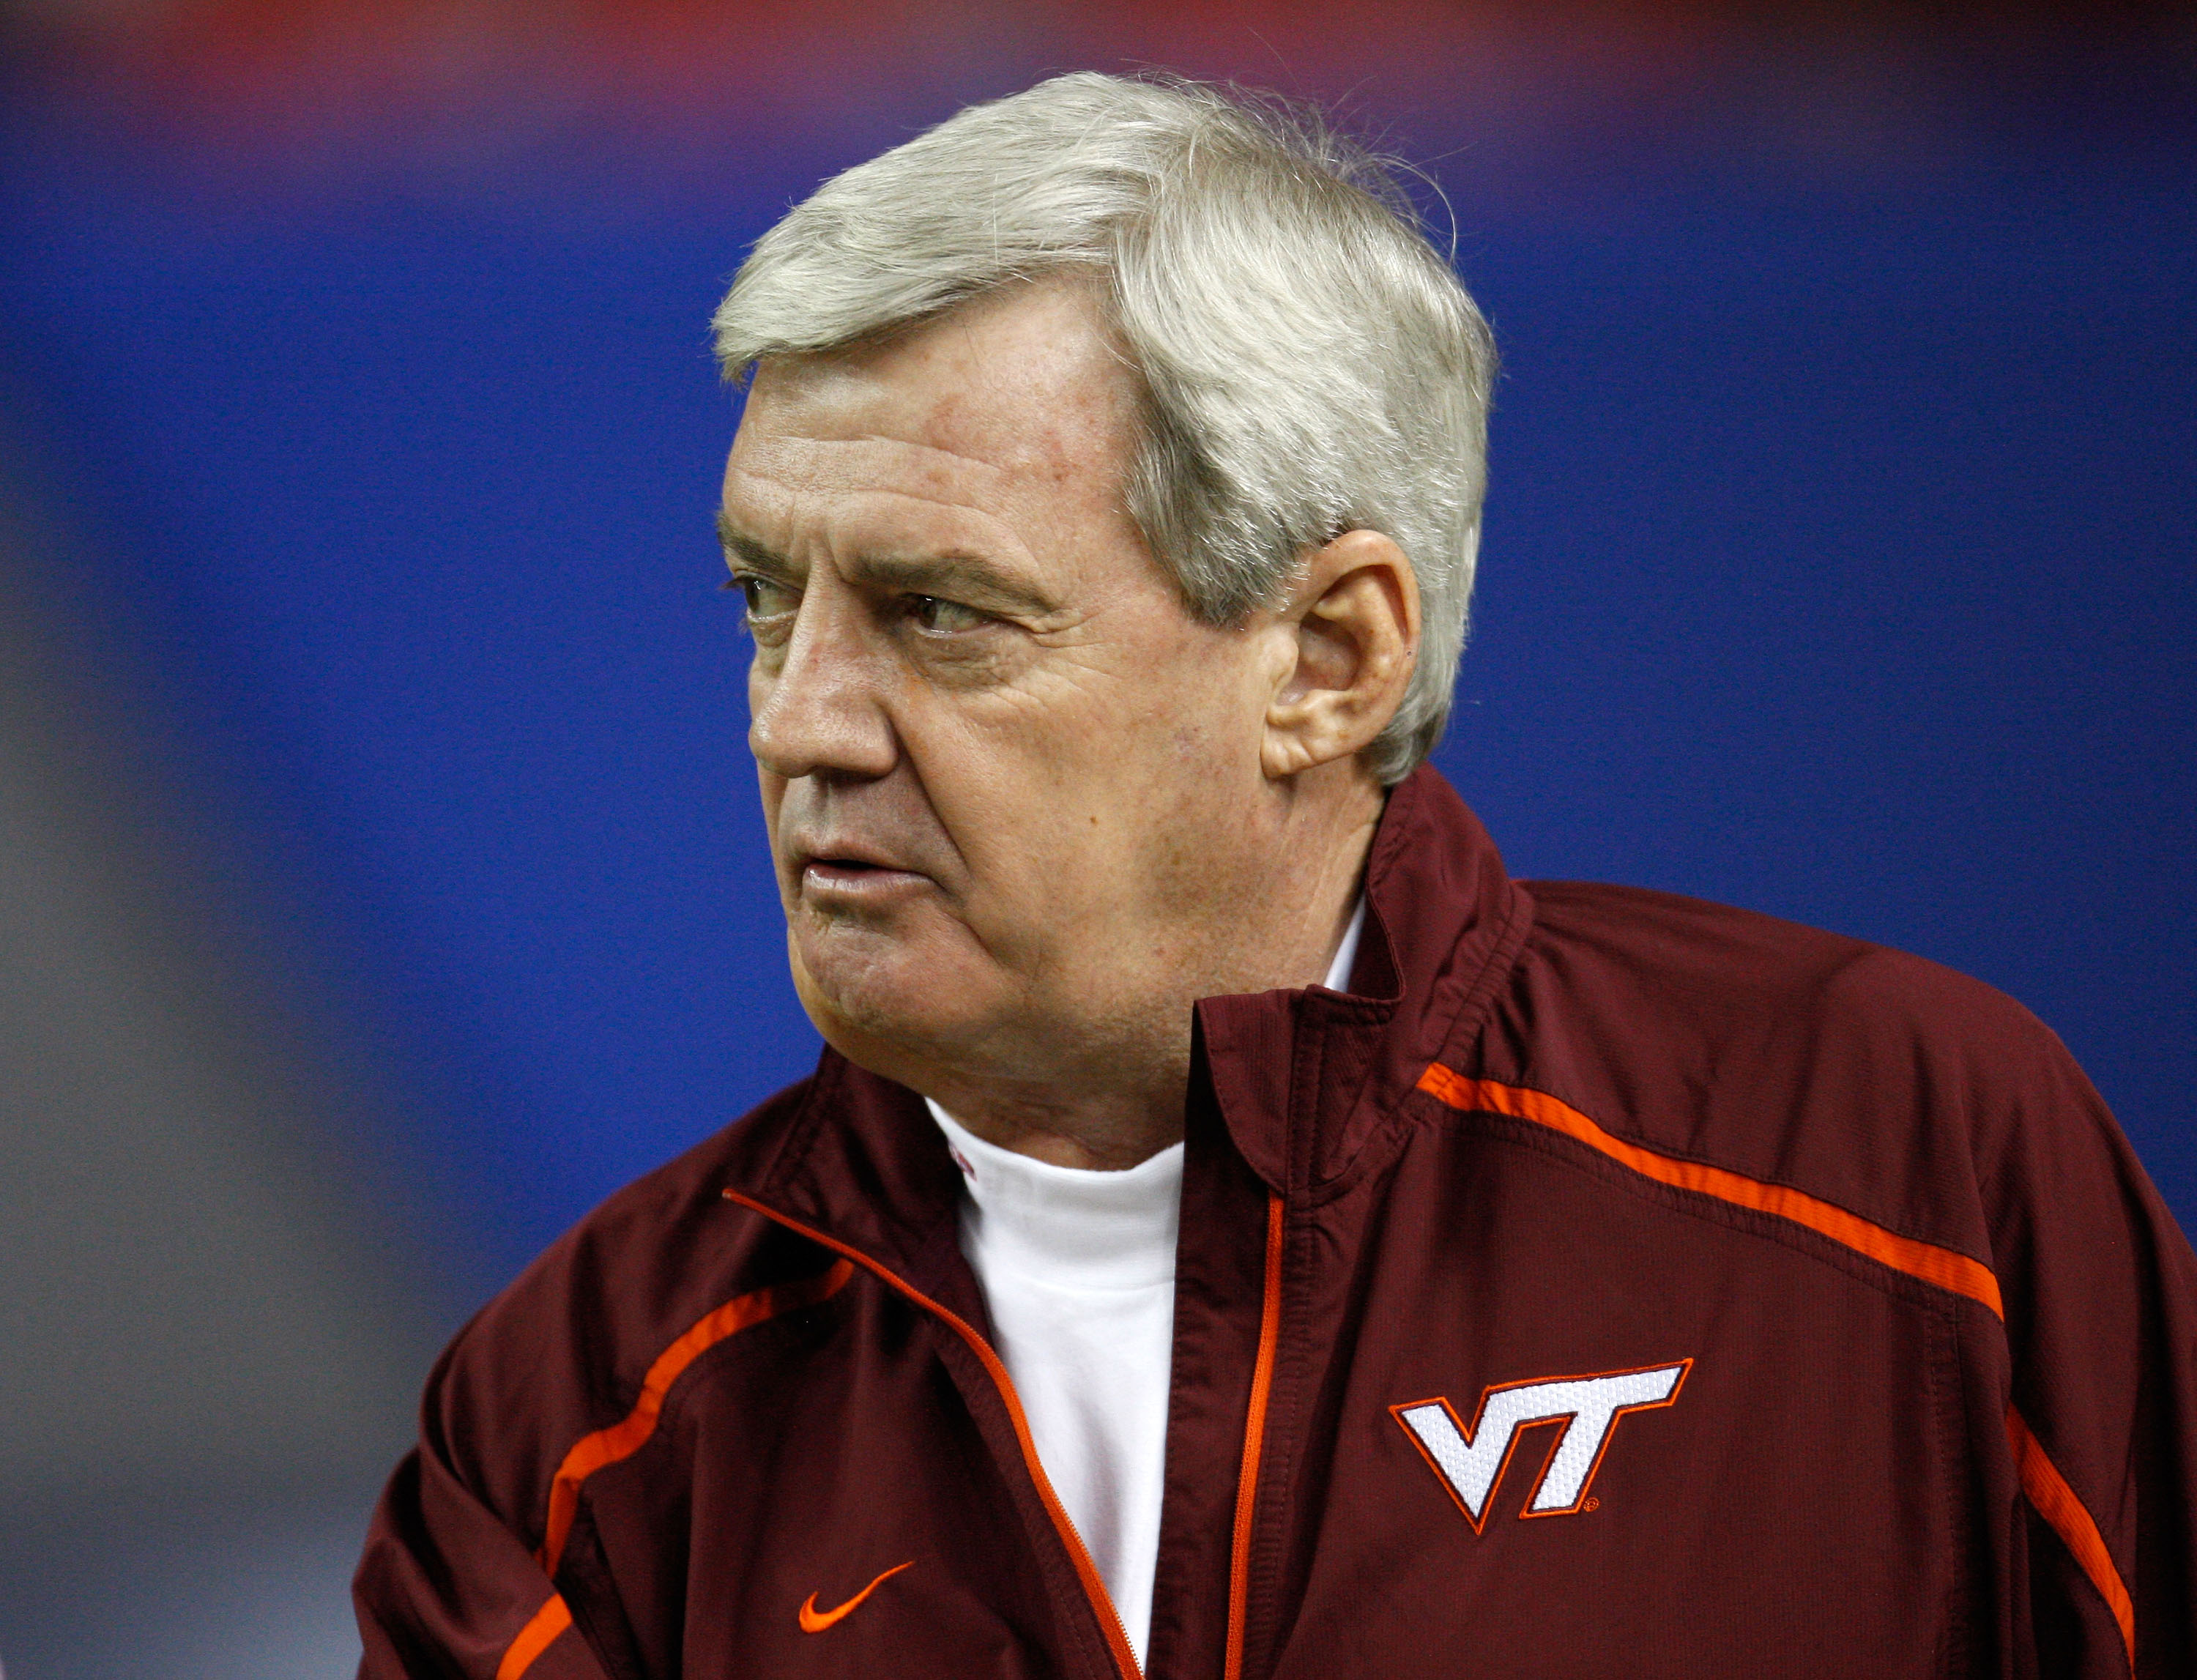 ATLANTA - DECEMBER 31:  Head coach Frank Beamer of the Virginia Tech Hokies watches pre-game warmups before the Chick-Fil-A Bowl against the Tennessee Volunteers at the Georgia Dome on December 31, 2009 in Atlanta, Georgia.  The Hokies beat the Volunteers